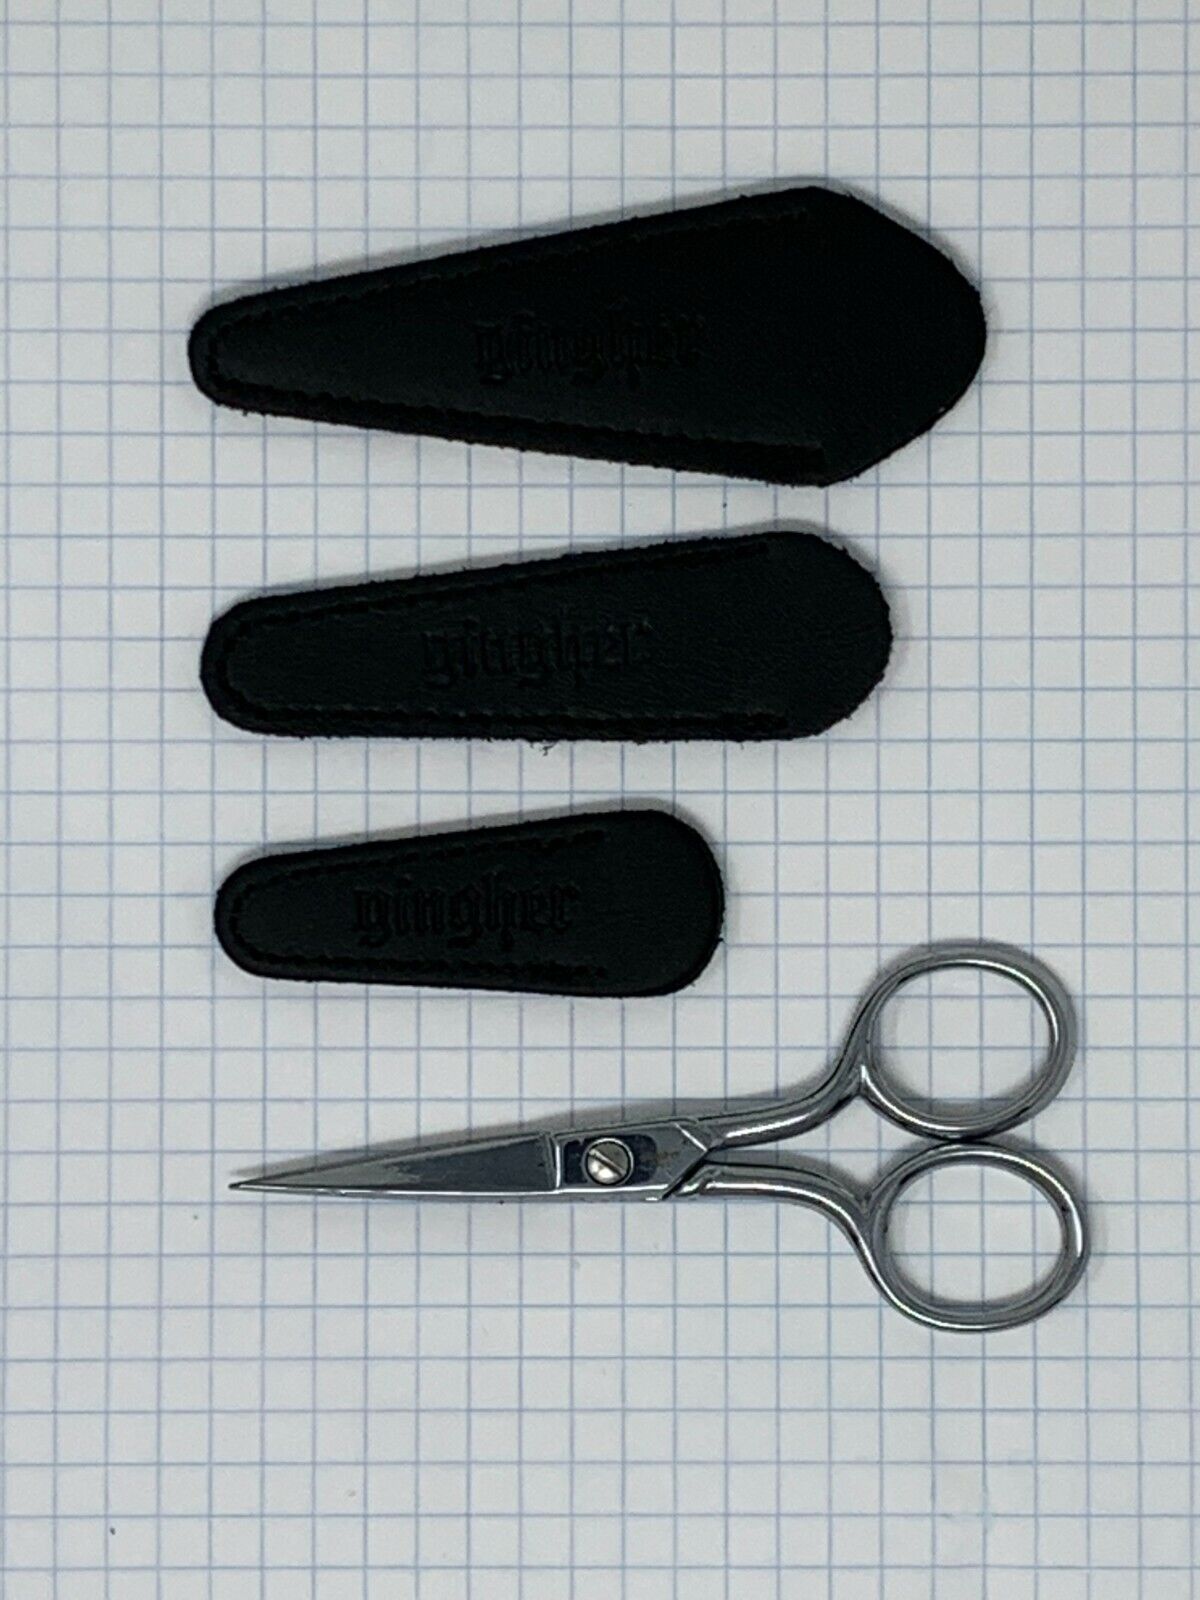 Embroidery Scissor Sheath, Gingher, Leather - Choose Your Size!